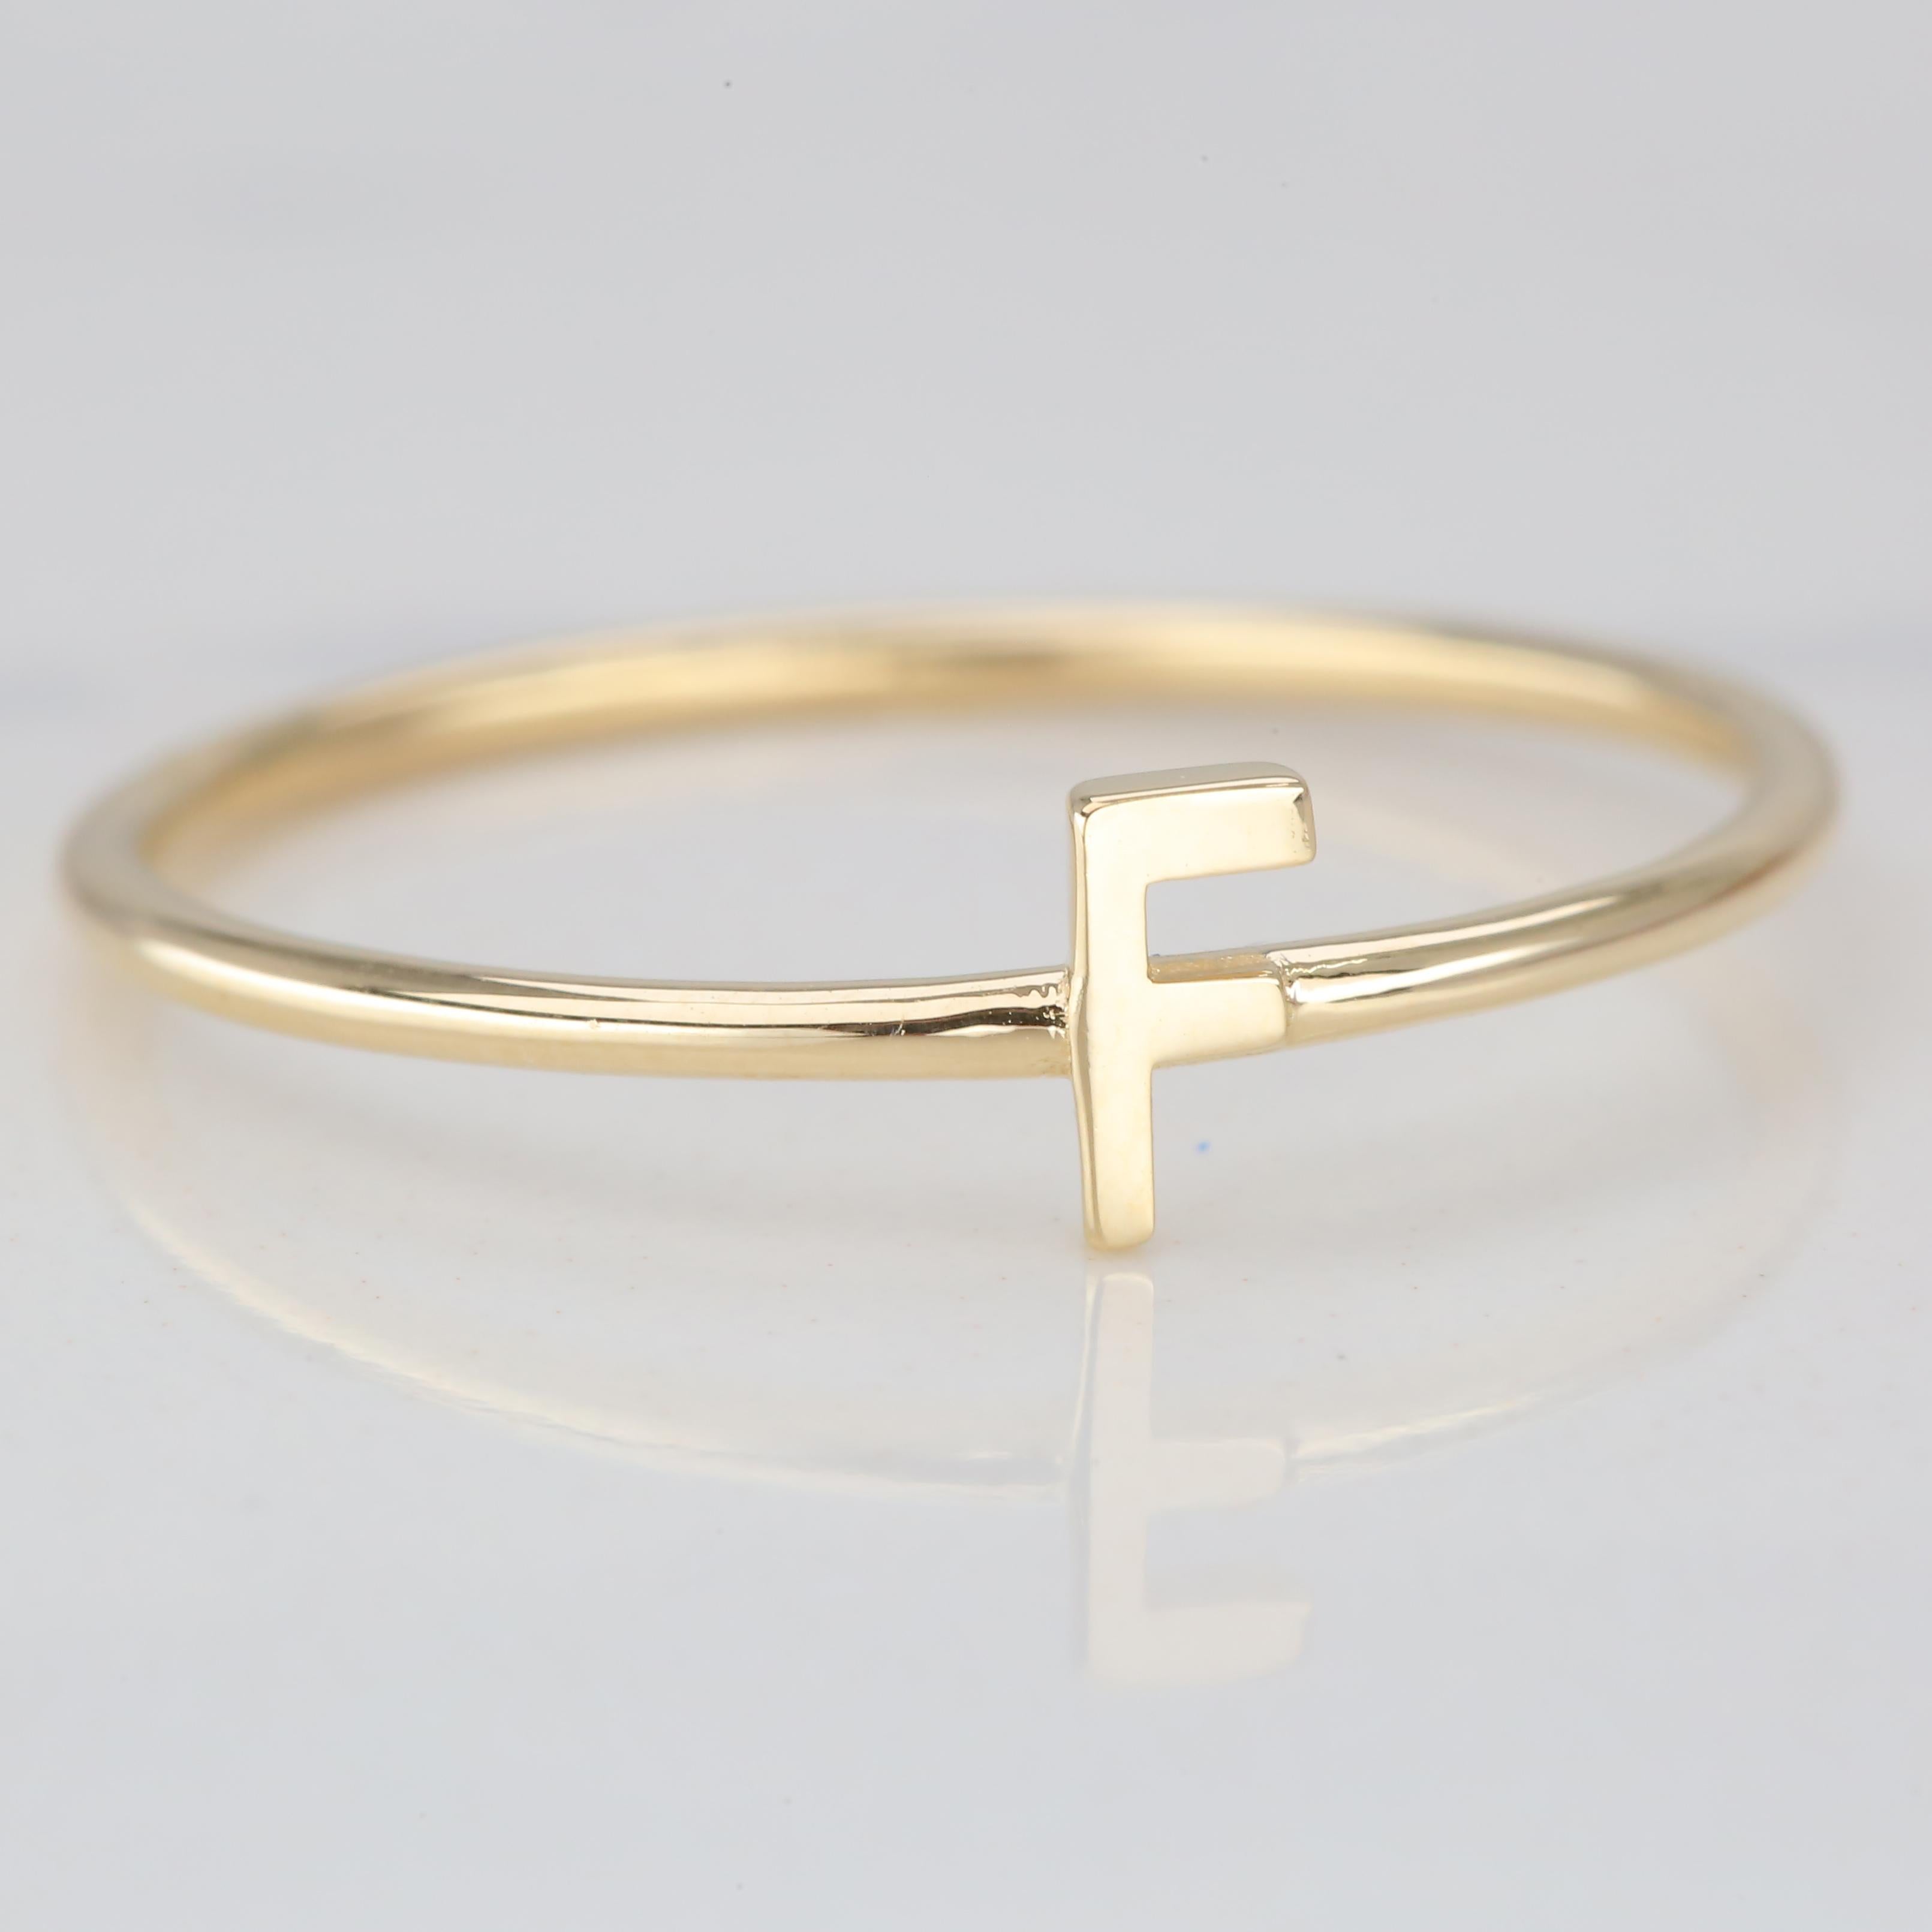 For Sale:  14K Gold Initial F Letter Ring, Personalized Initial Letter Ring 3